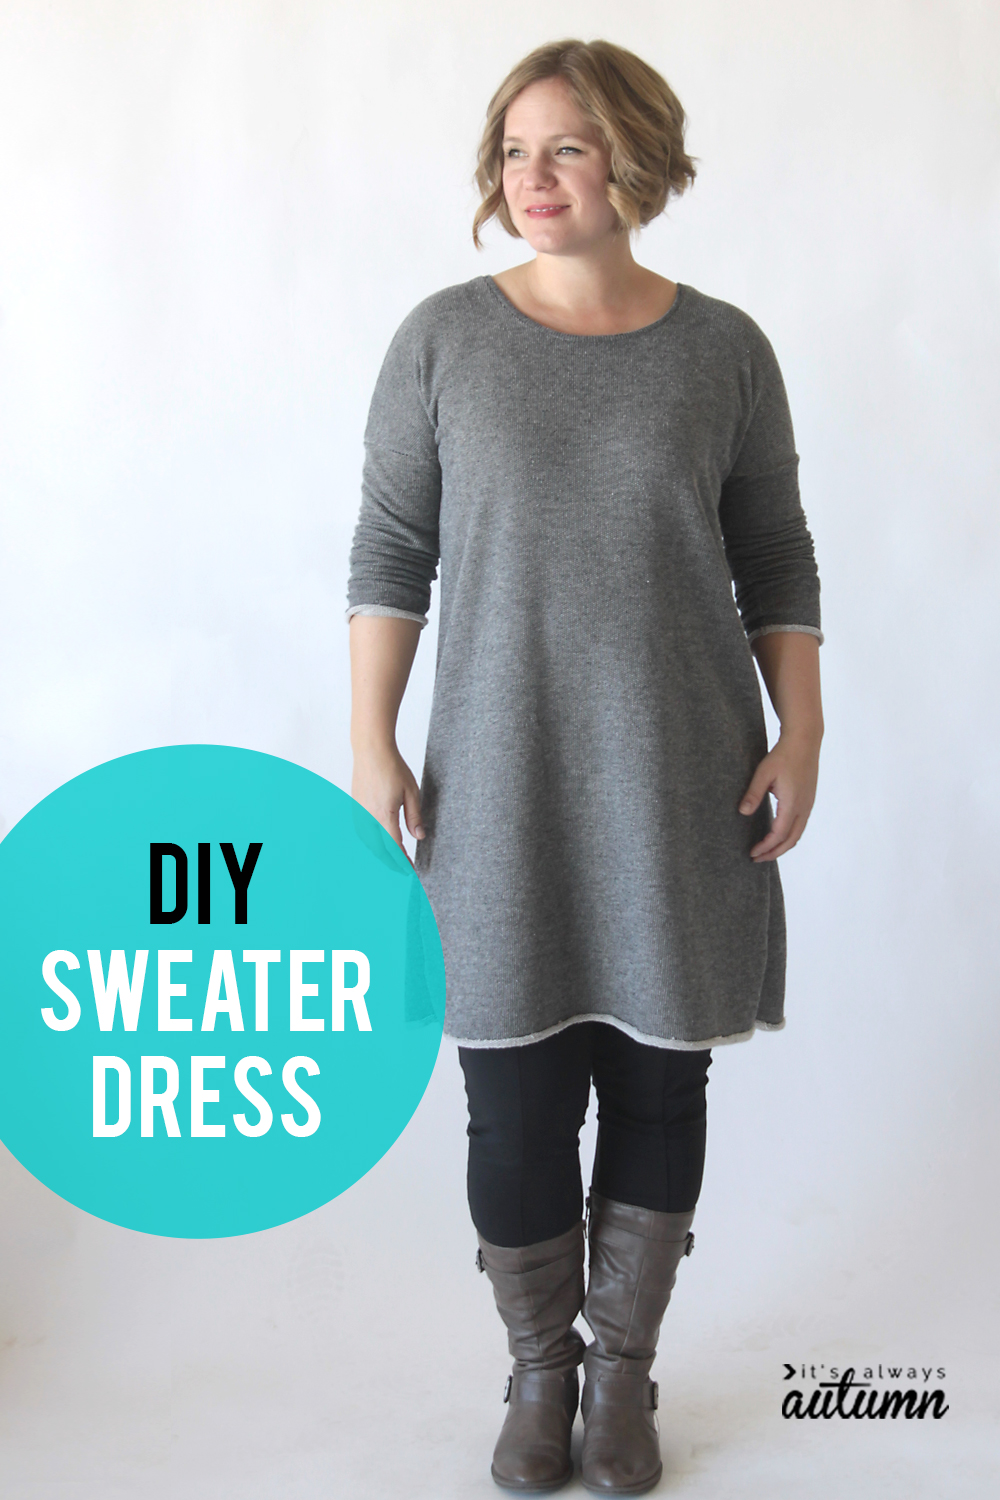 Make a cute and comfy DIY sweater dress with this easy sewing pattern.